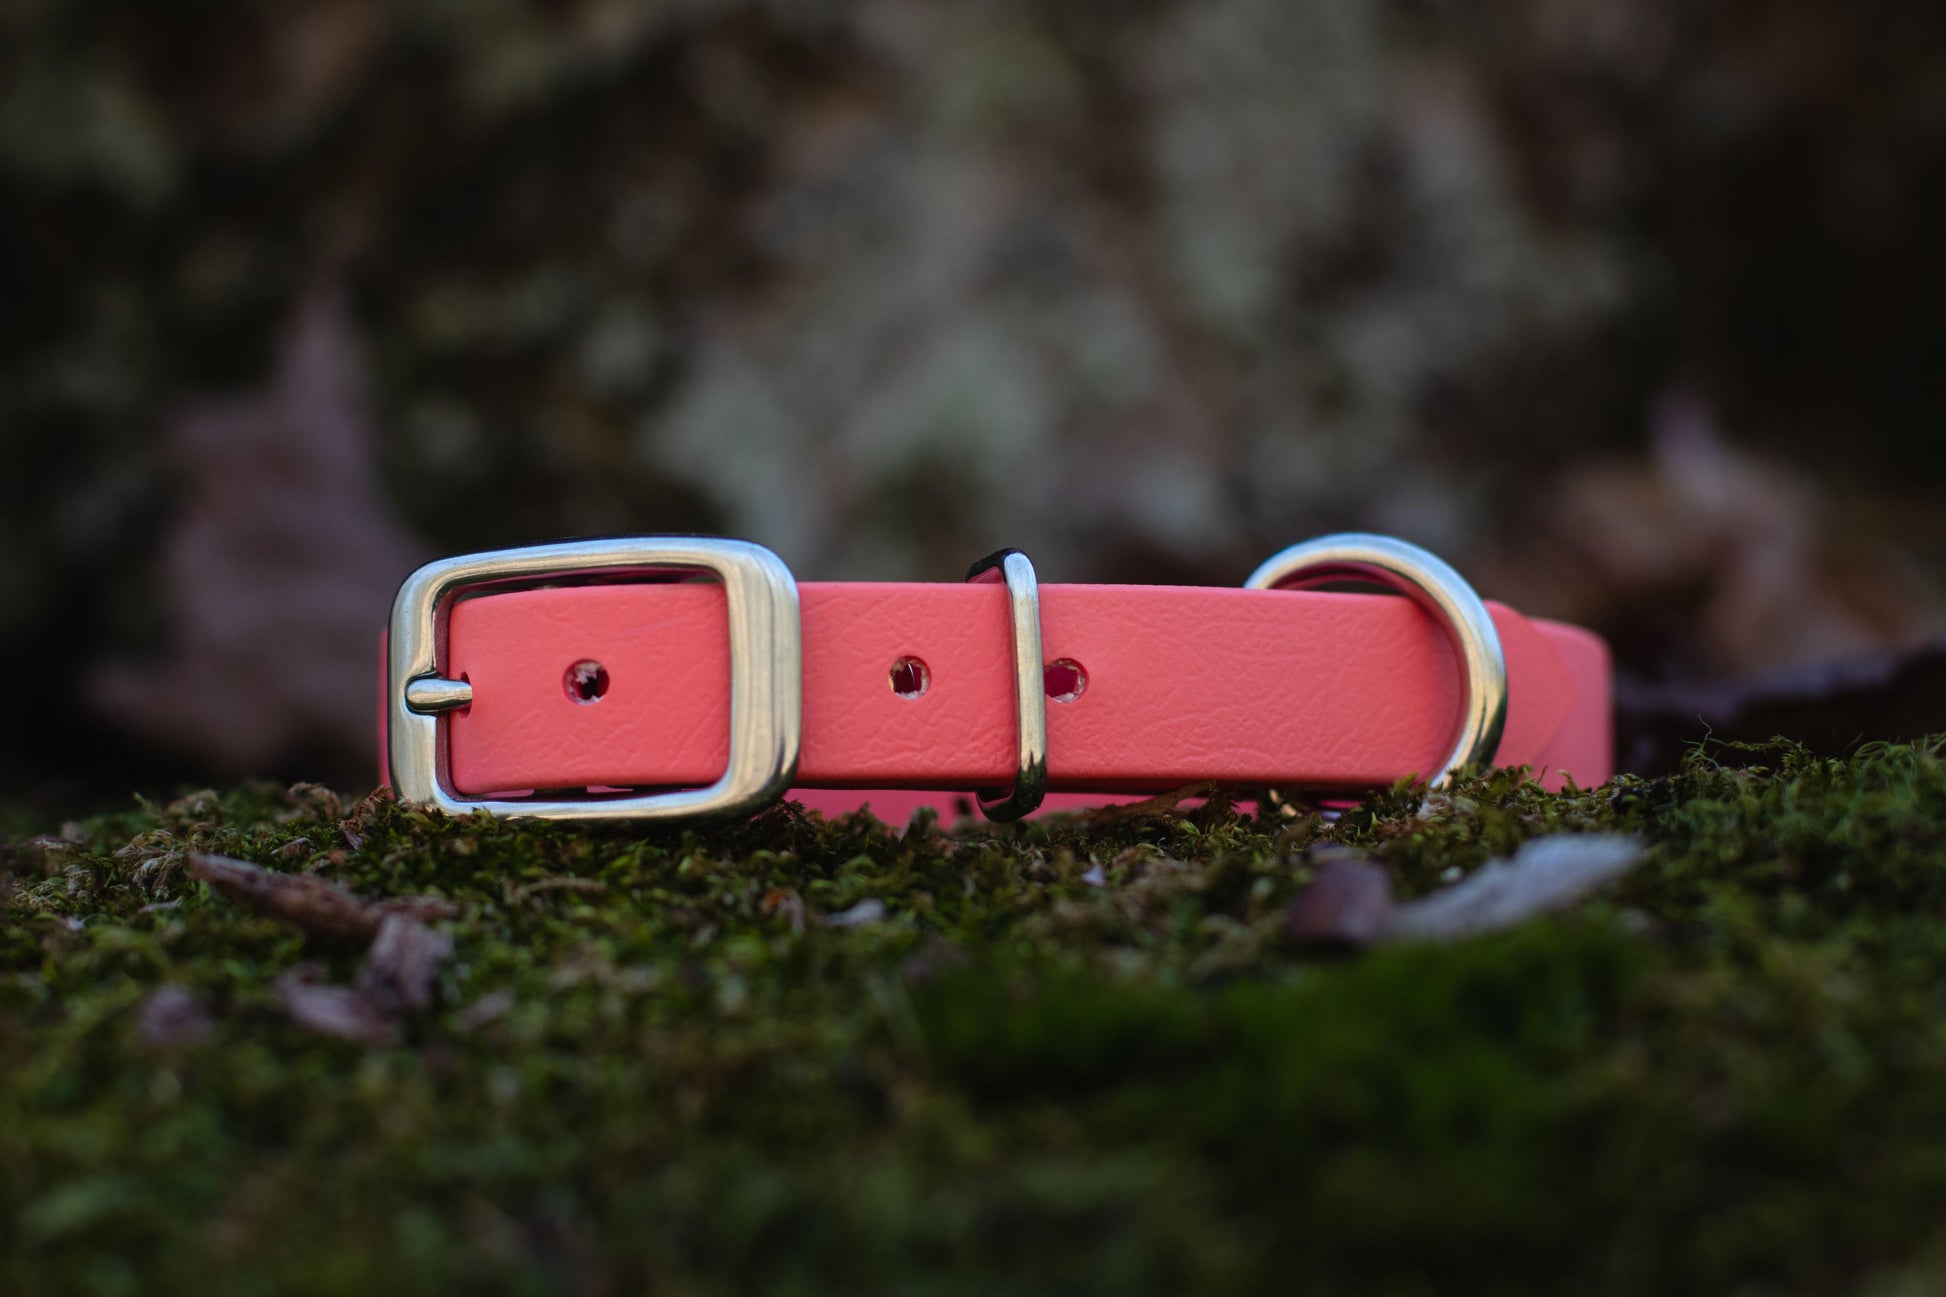 Backwoods Dog 5/8" waterproof biothane stainless steel buckle dog collar in coral